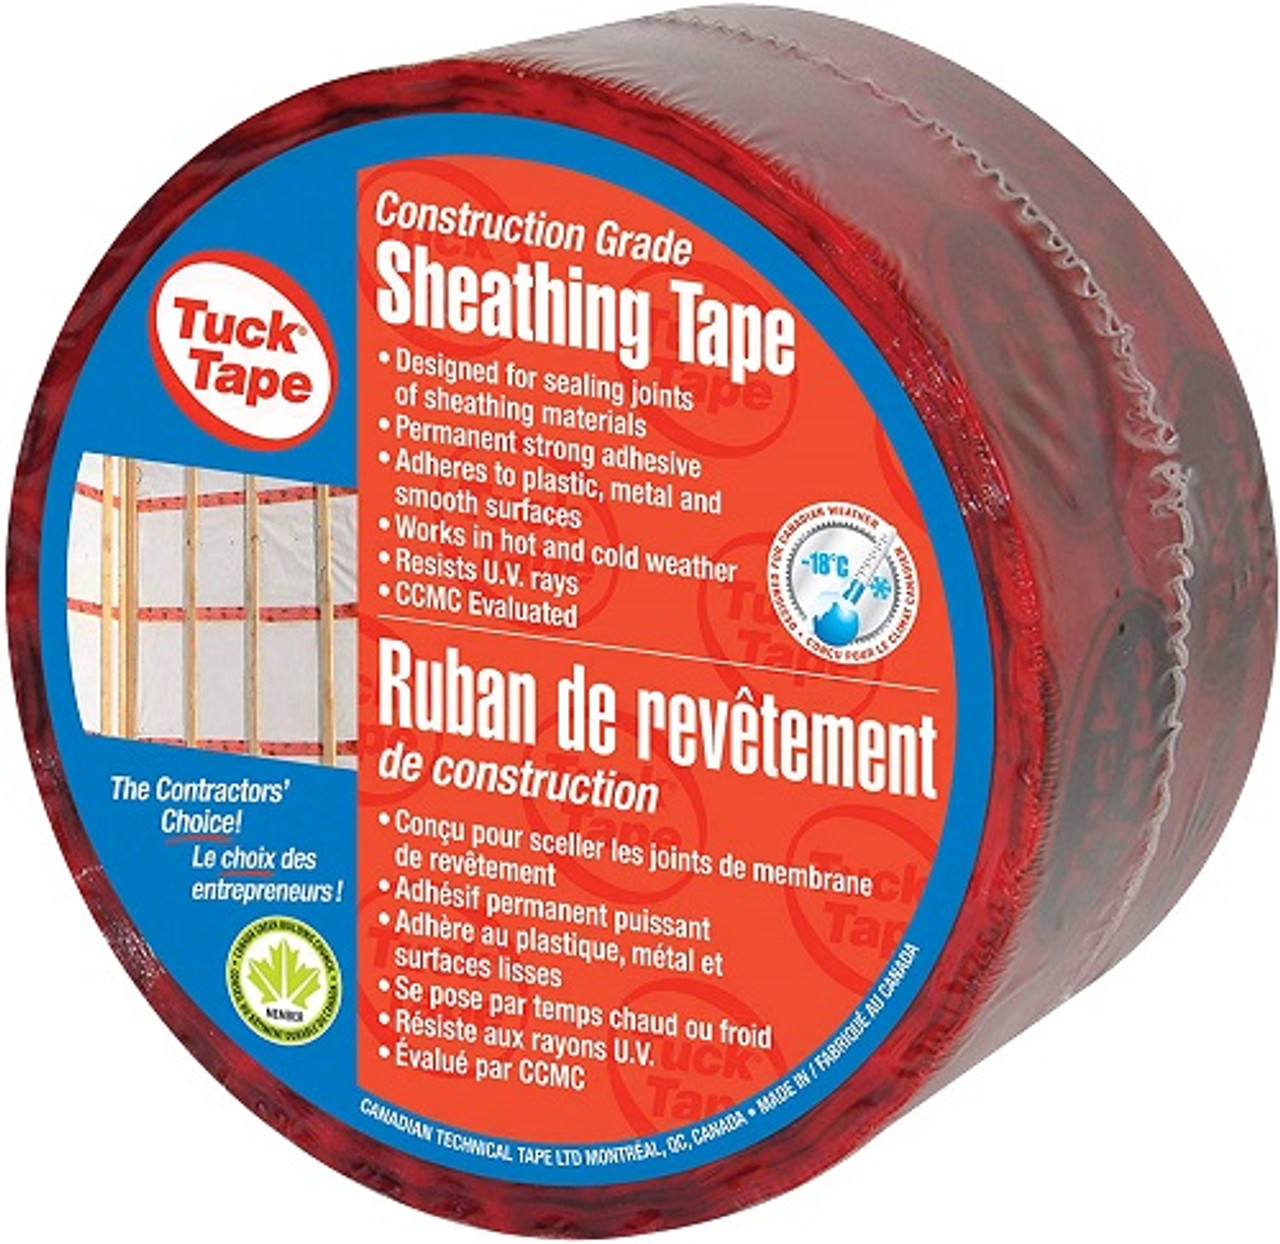 TUCK TAPE RED ( SHEATHING TAPE ) 60MM X 55M - 20/CS - Safety Express